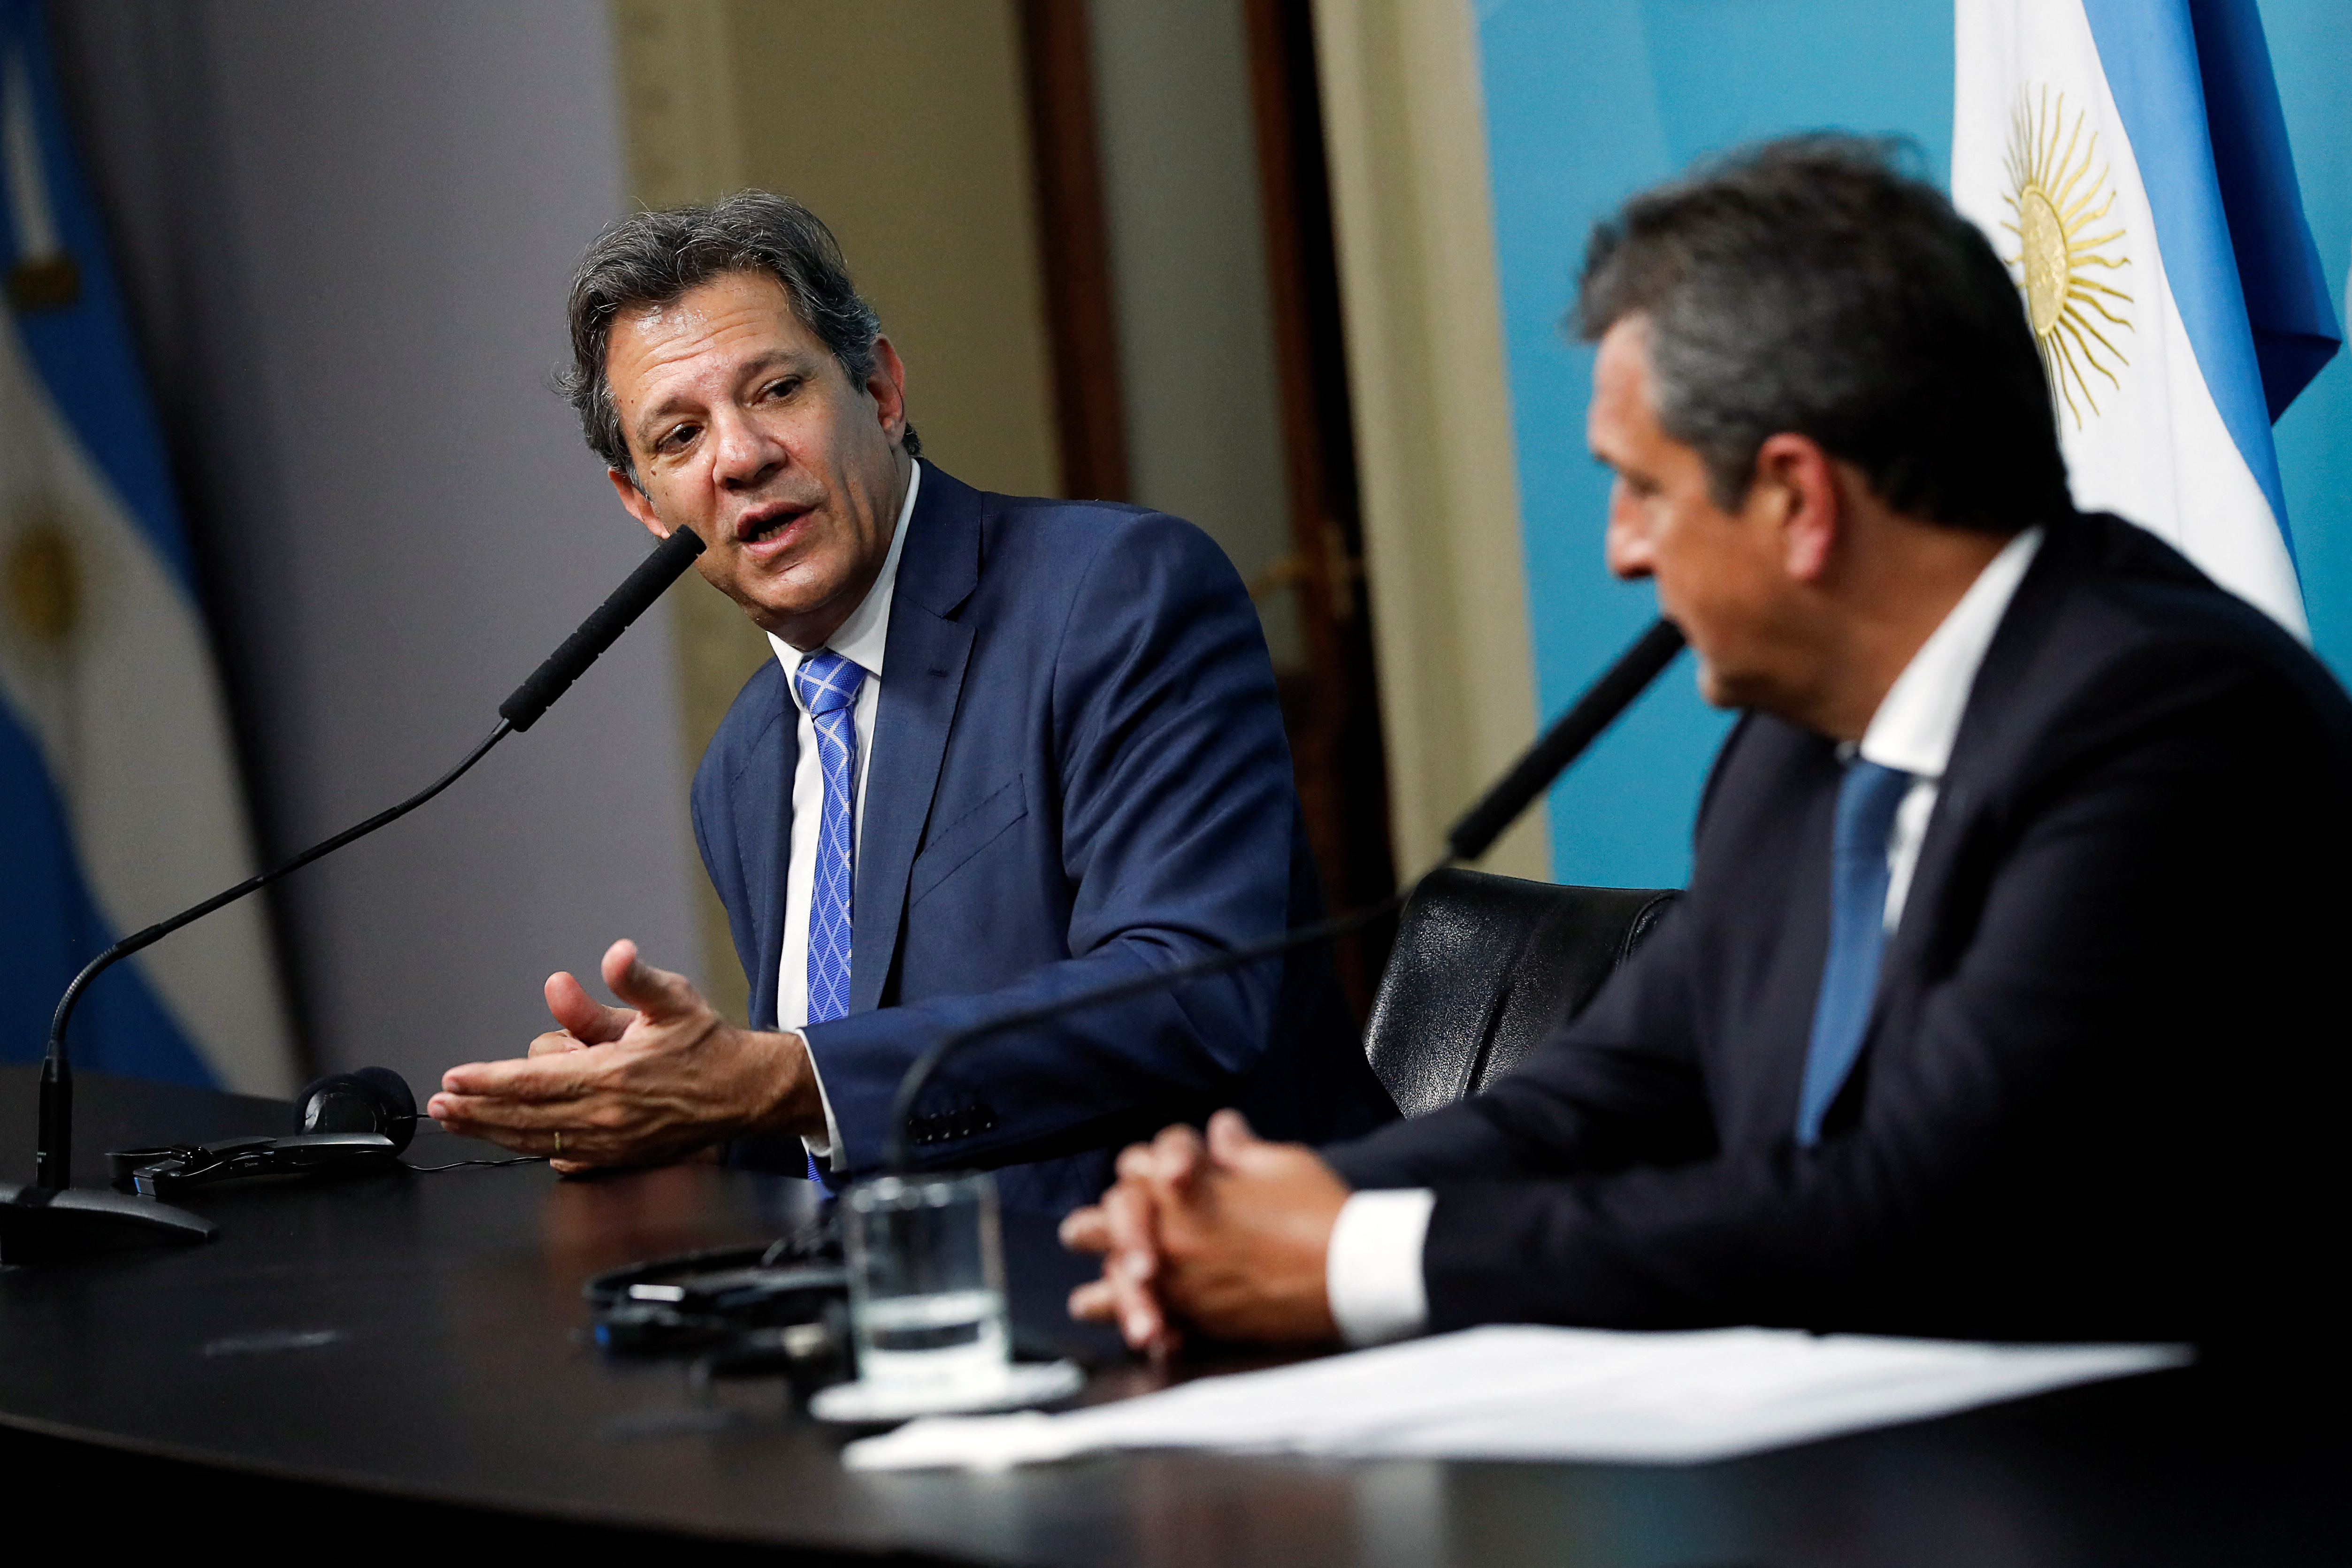 Argentina's Economic Minister Sergio Massa and Brazil's Finance Minister Fernando Haddad hold a news conference, at the Casa Rosada presidential palace in Buenos Aires, Argentina, January 23, 2023. REUTERS/Agustin Marcarian